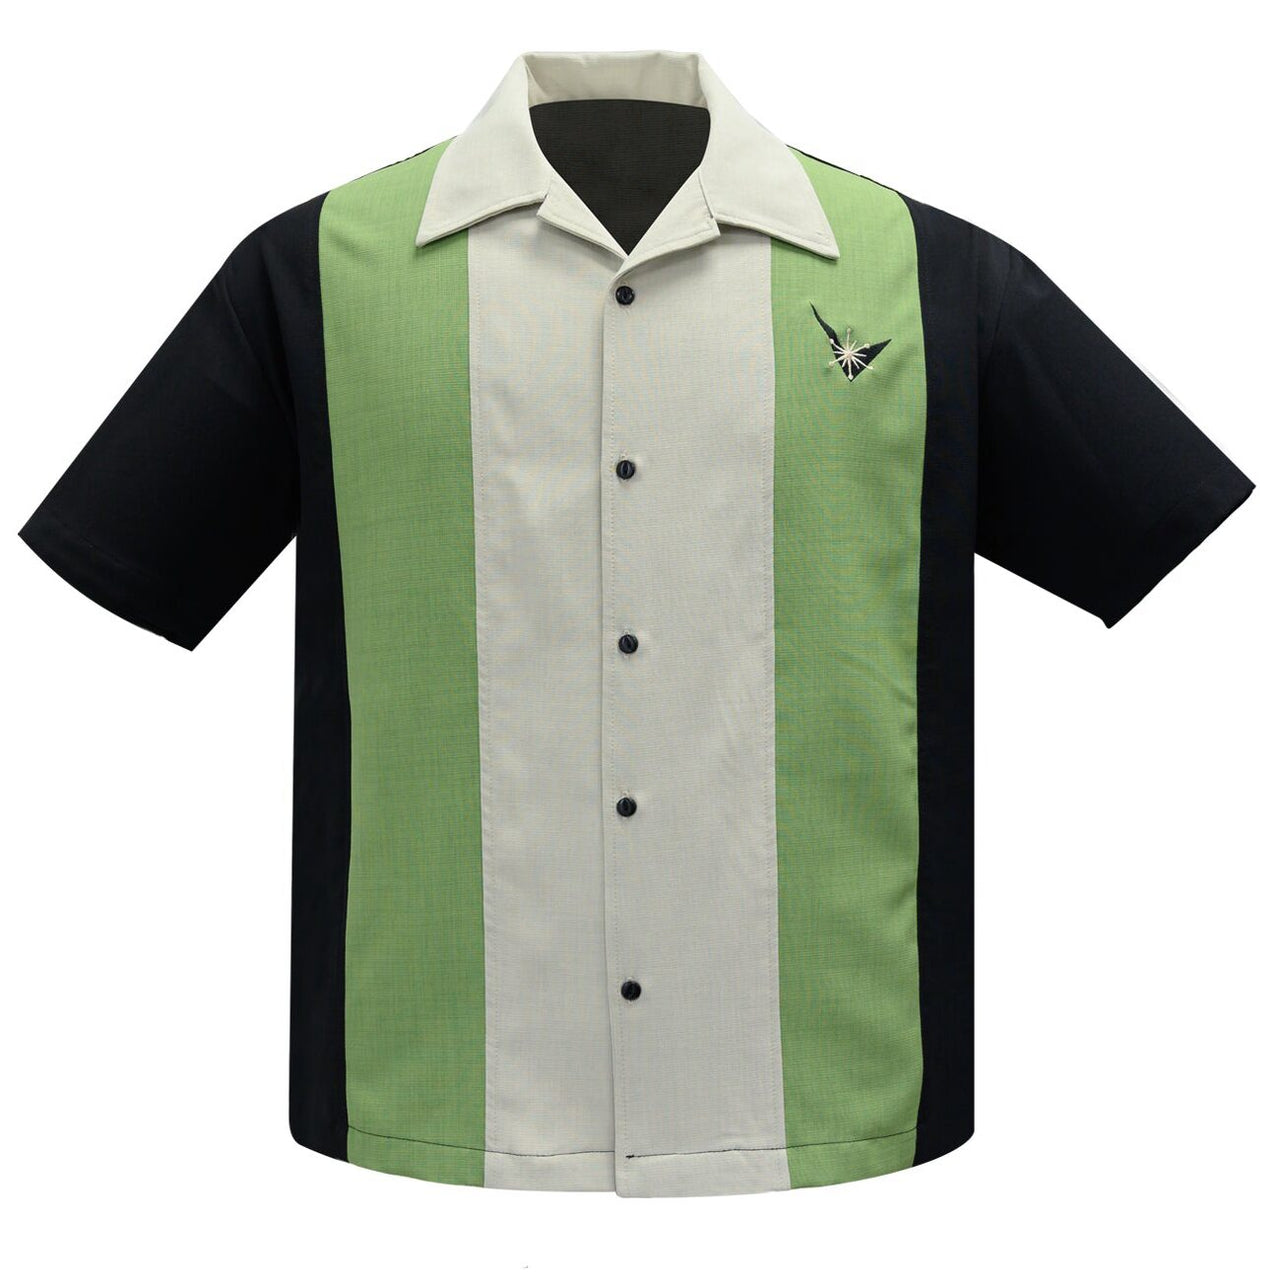 Atomic Mad Men Bowling Shirt by Steady Clothing